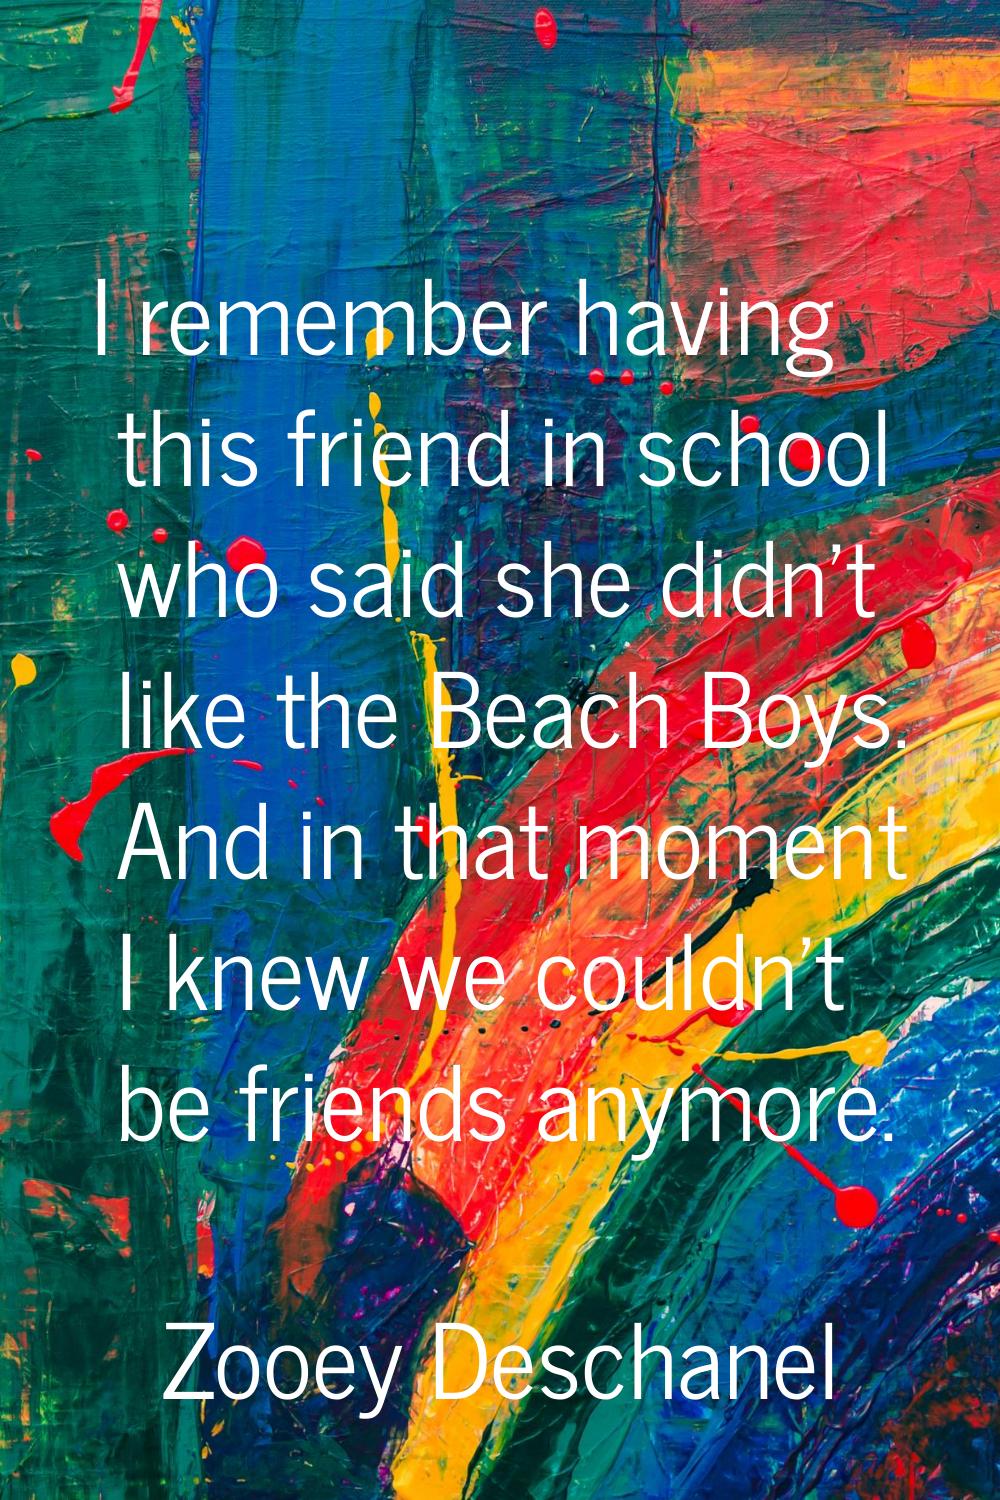 I remember having this friend in school who said she didn't like the Beach Boys. And in that moment